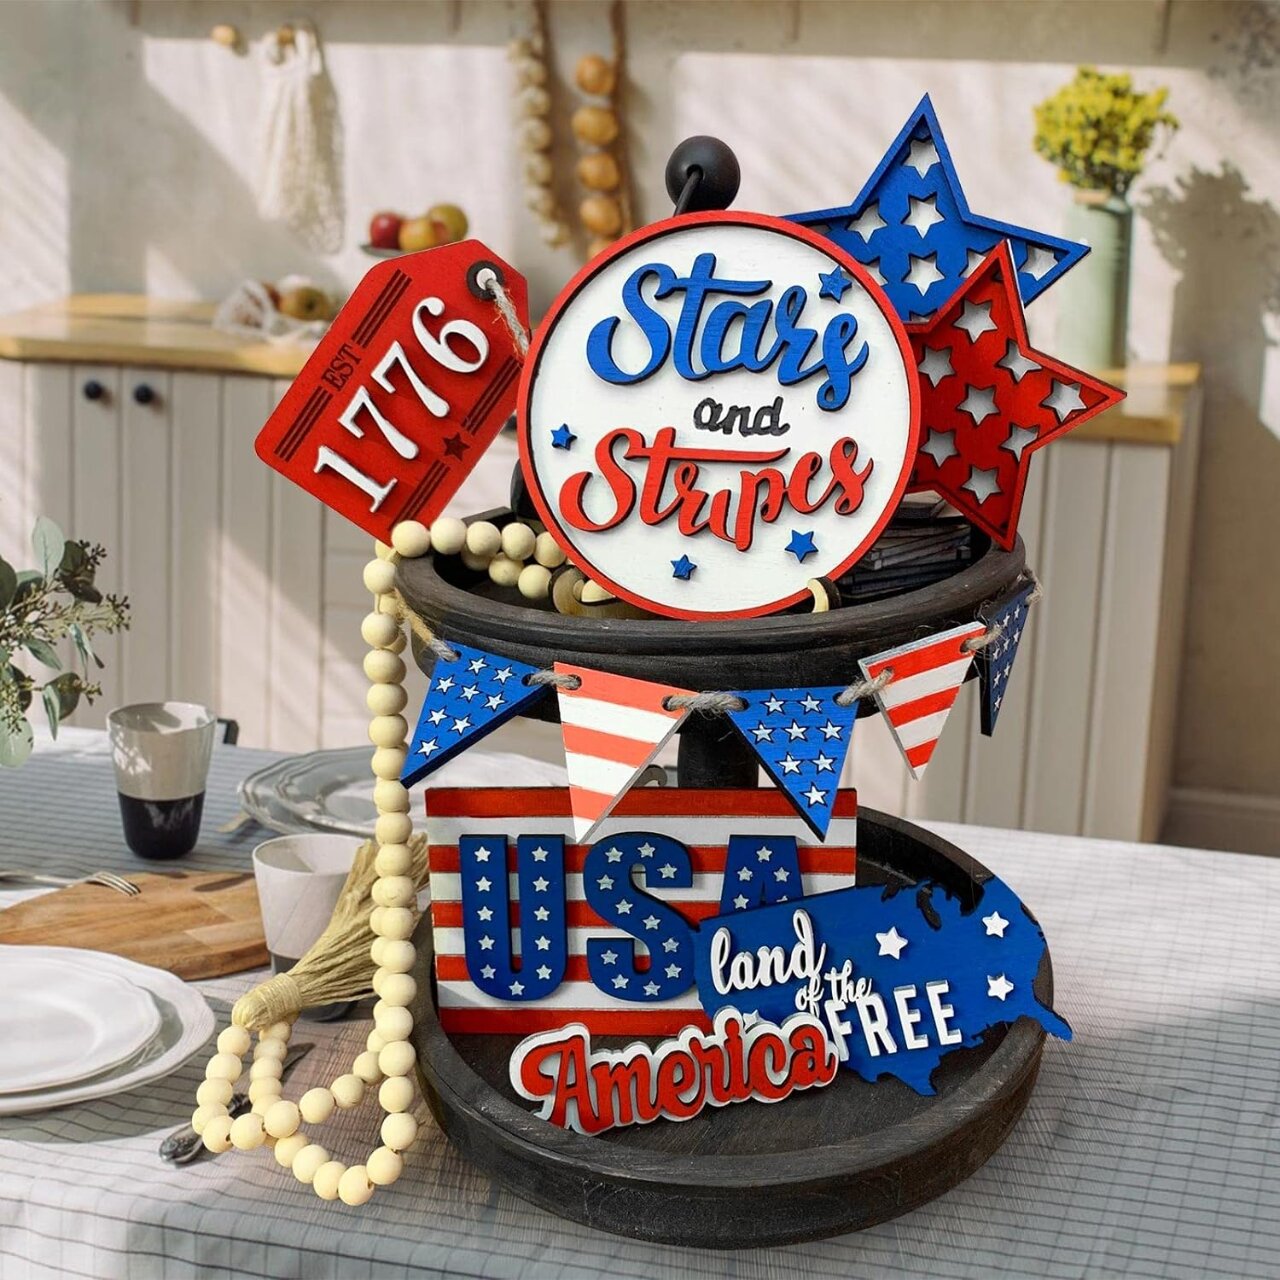 Wooden- Tiered Tray Decor 15Pcs Independence Day (BUY 2 SAVE 10% & FREE SHIPPING)